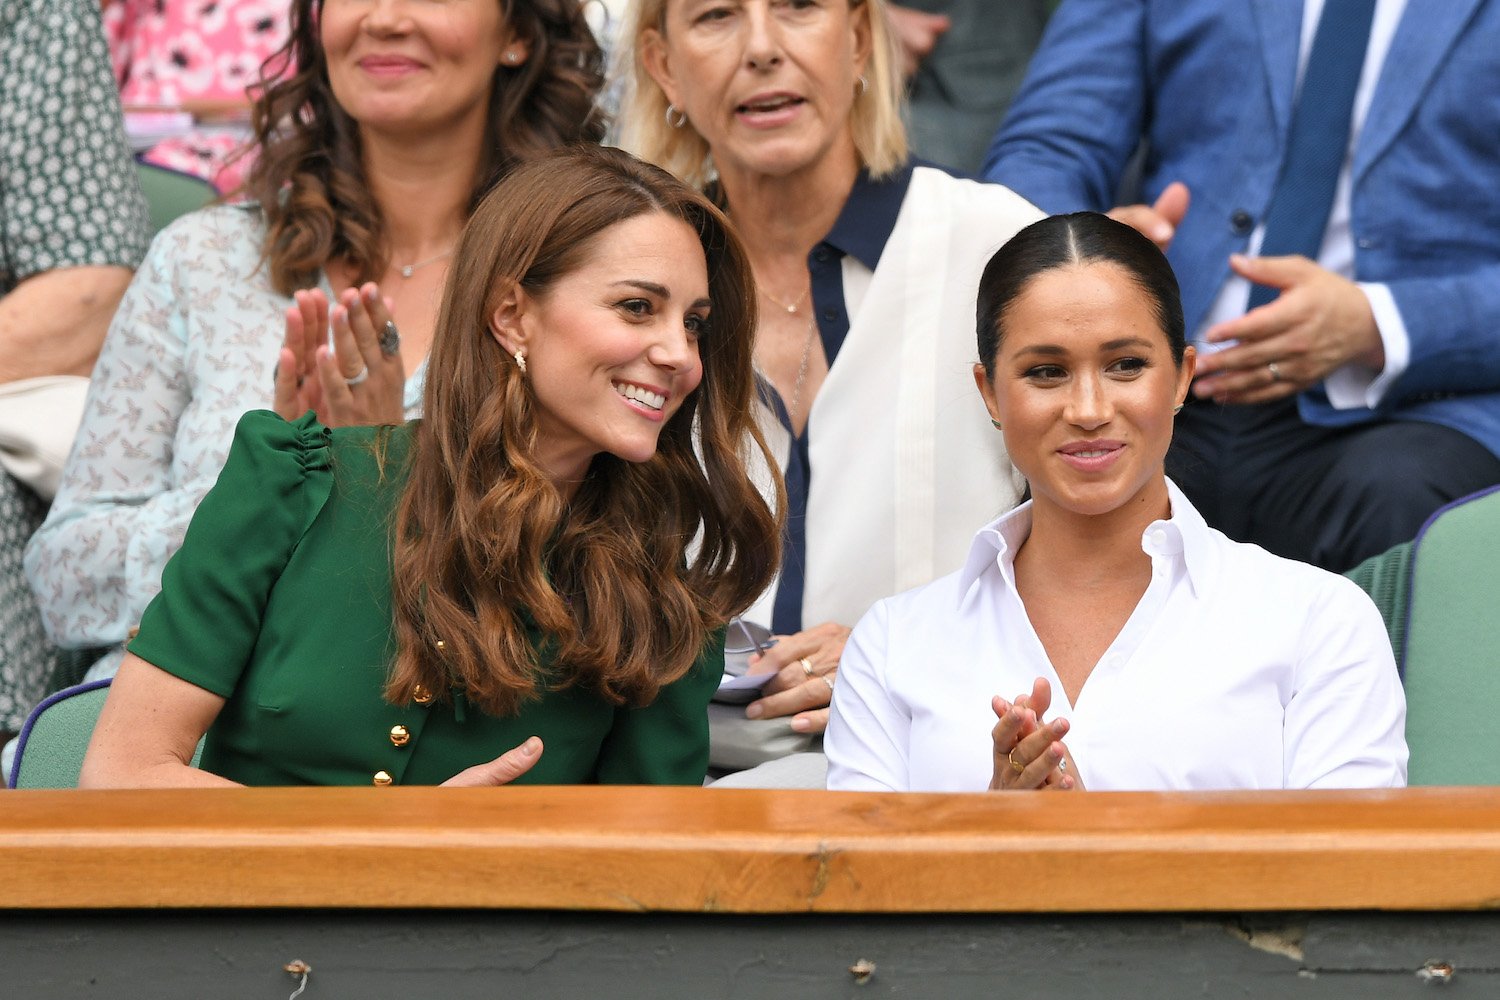 Kate Middleton and Meghan Markle in the Royal Box on Centre Court during day twelve of the Wimbledon Tennis Championships